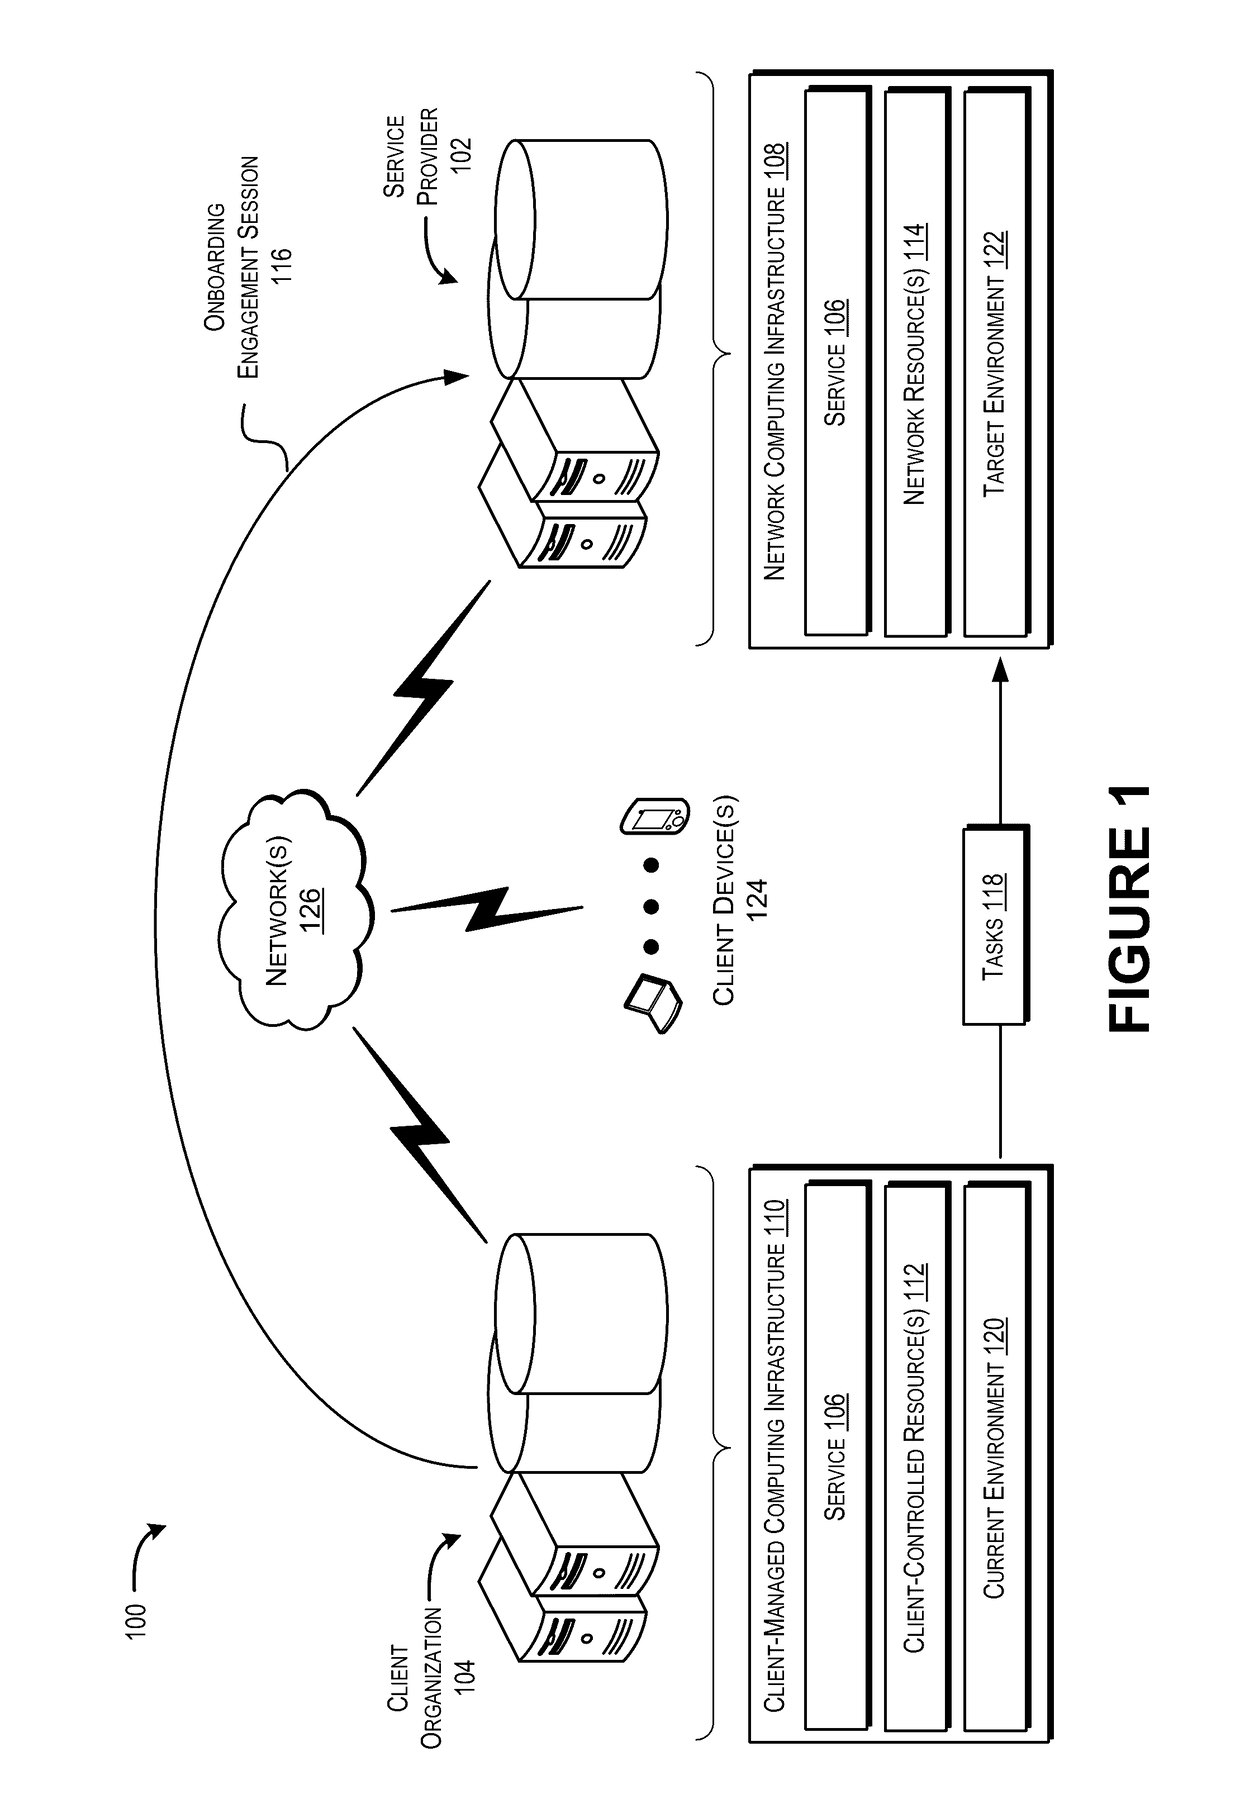 Onboarding of a Service Based on Automated Supervision of Task Completion